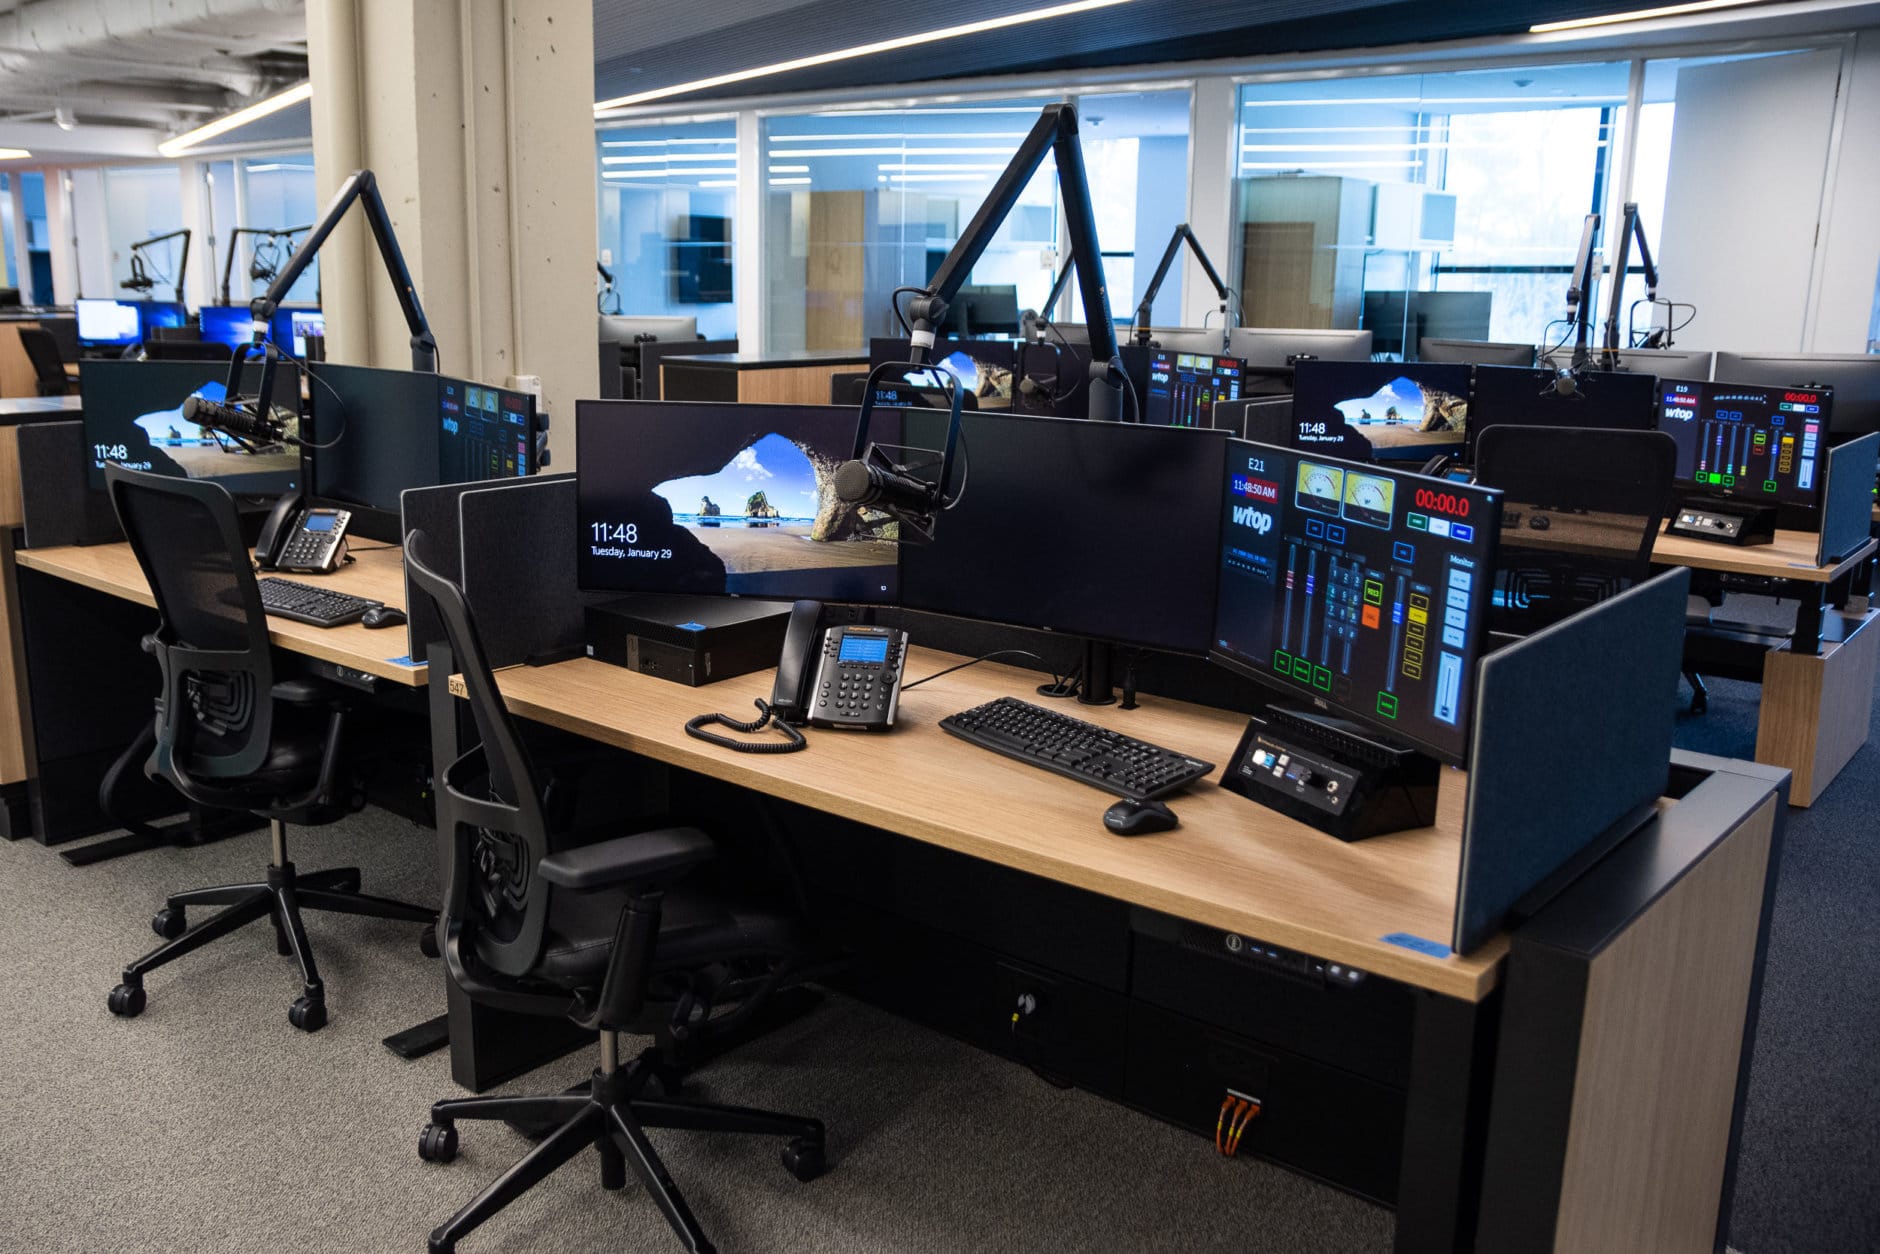 A typical reporter work station in WTOP's Wisconsin Avenue newsroom. Most stories from WTOP's radio reporters will be filed from stations like this one, featuring a virtual audio mixer, new system for phone interviews and the ability to go live on-air through the main control board located nearby in the new Glass-Enclosed Nerve Center. They can also convert into standing desks with the push of a button. (WTOP/Alejandro Alvarez)